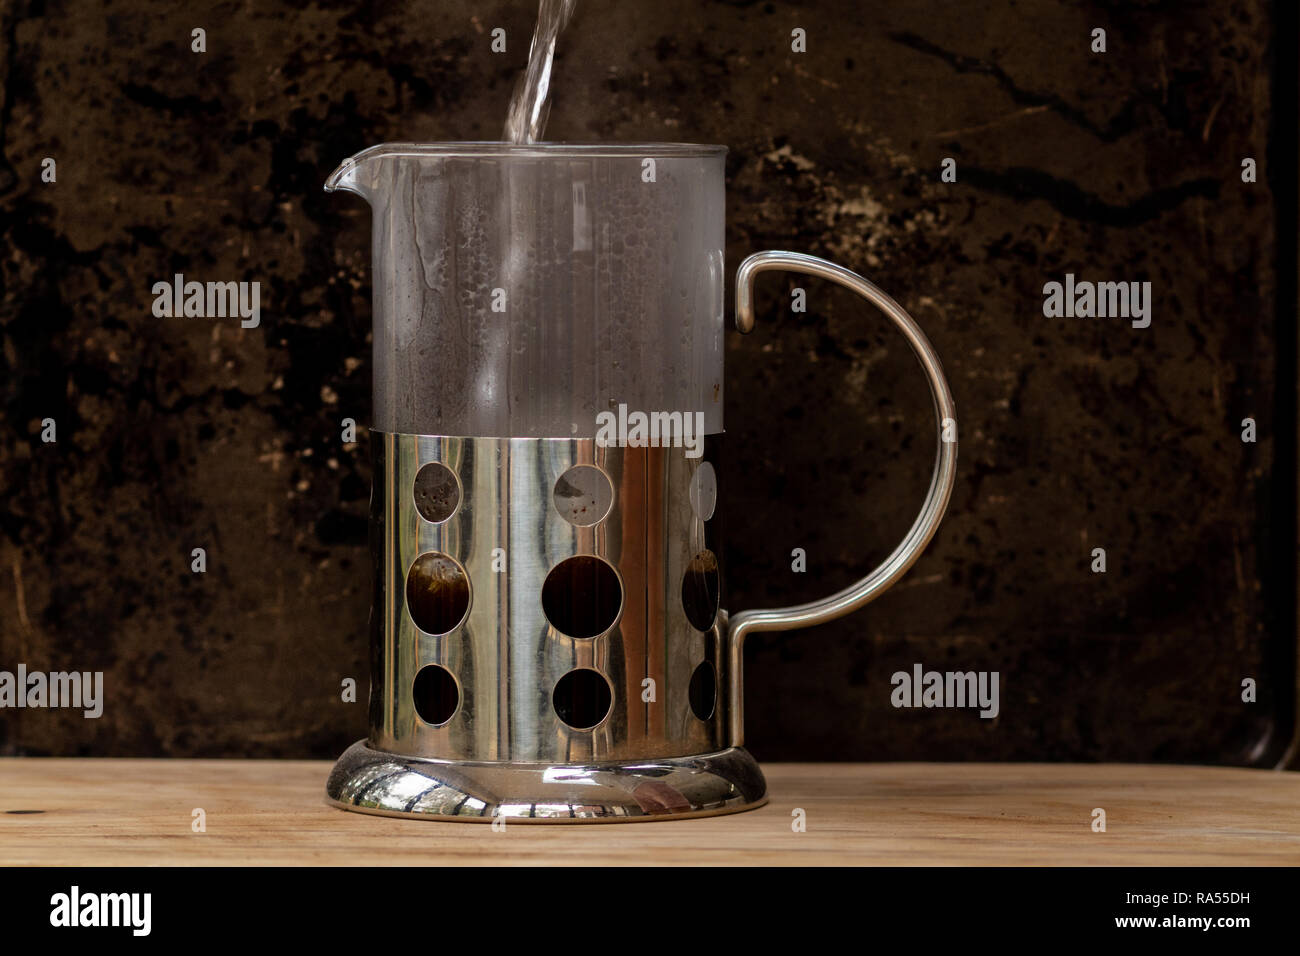 Pouring boiling water into cafetiere Stock Photo